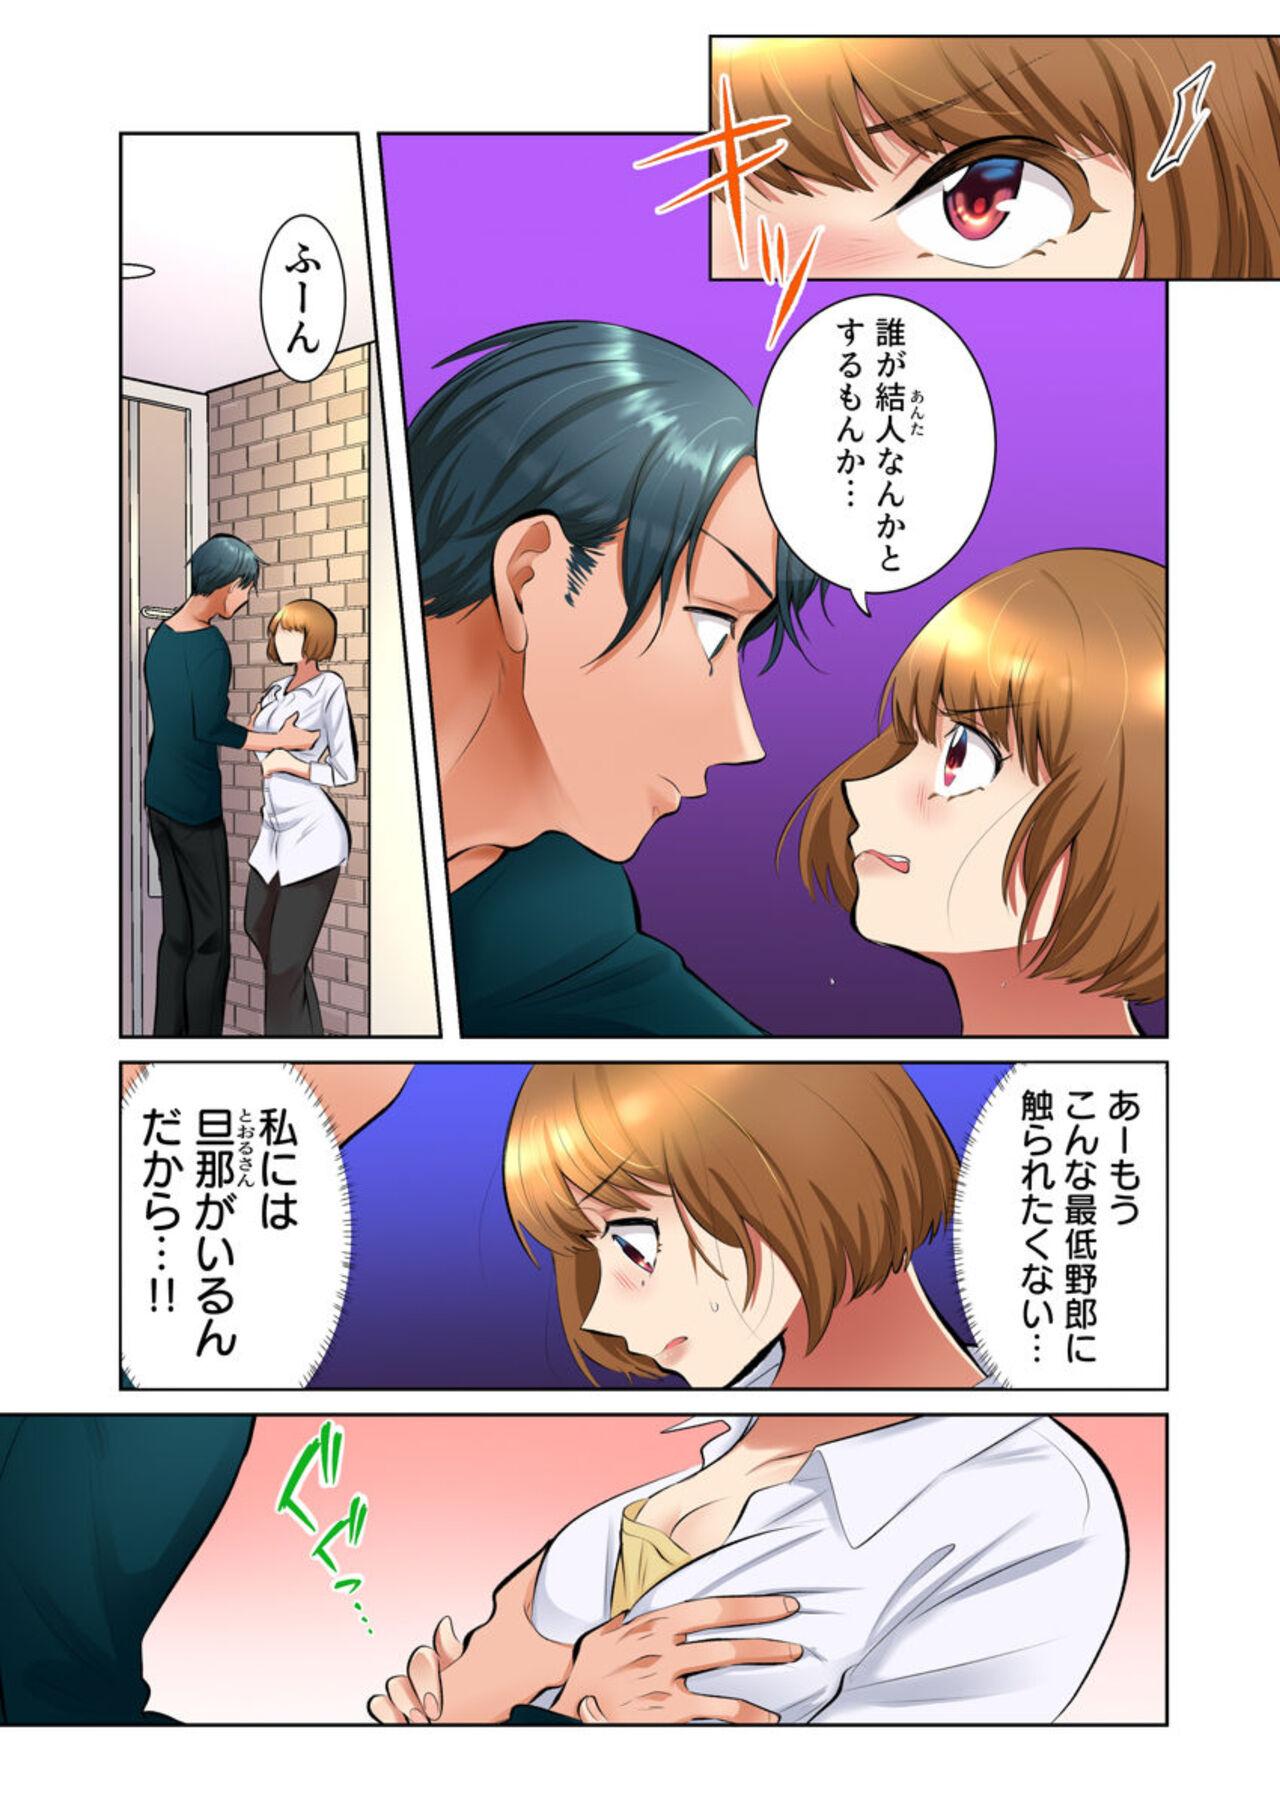 [Ika Hotaru] My Neighbor Is A Sadistic Ex-Boyfriend ~I Love My Husband, But My Aching Body Has Been Redeveloped~ (Full Color) 2 2